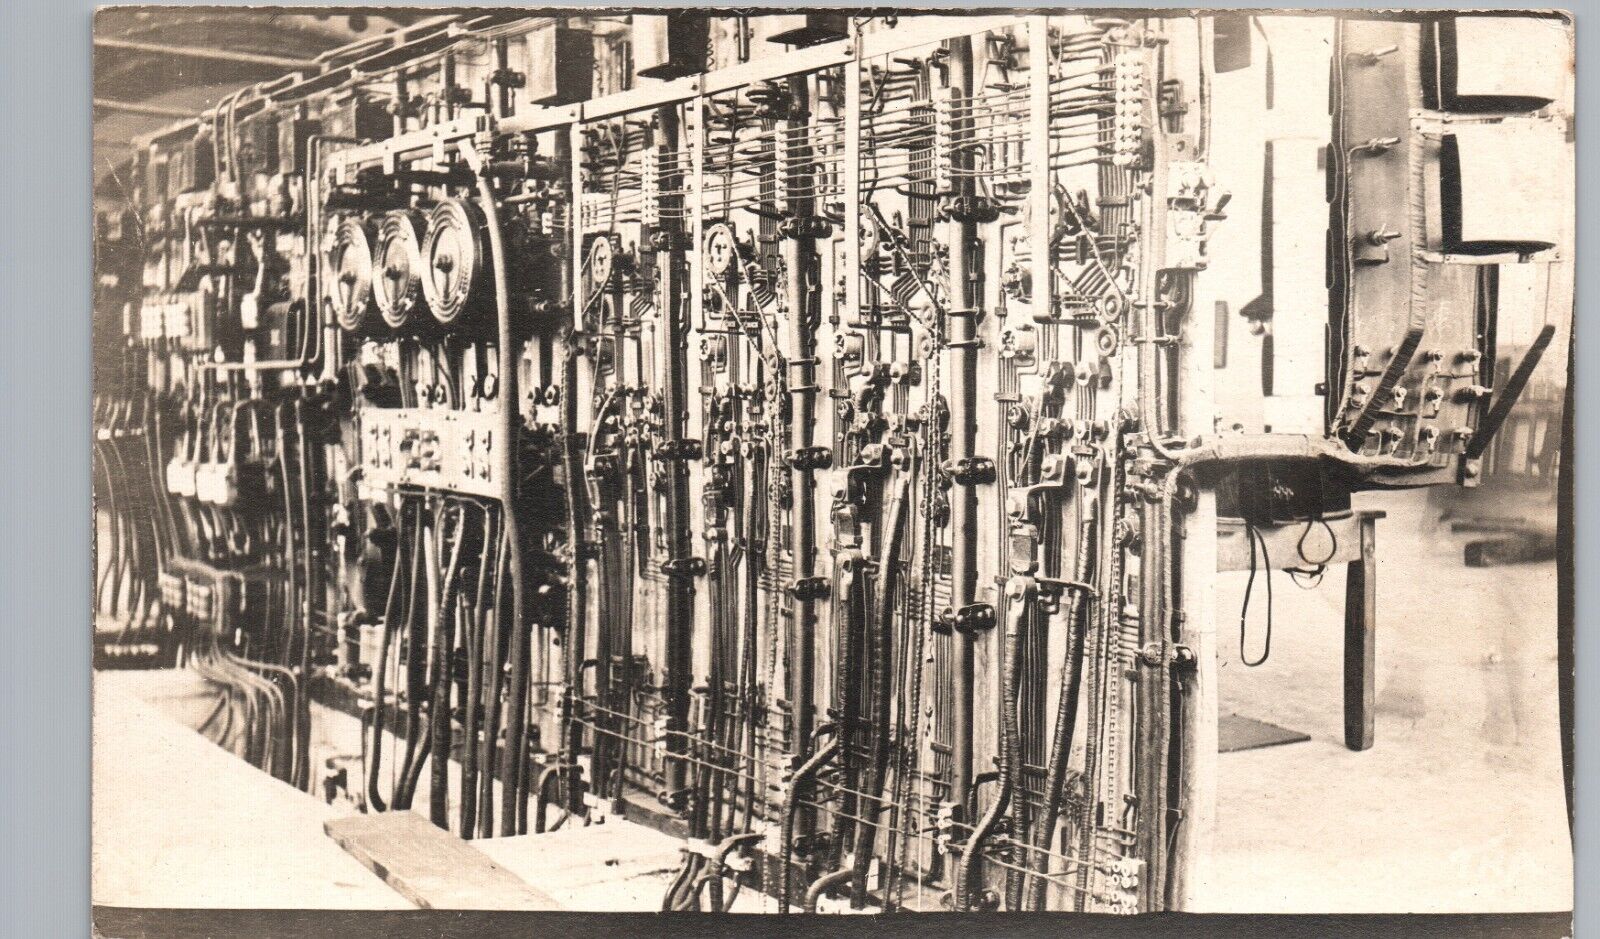 FACTORY SWITCHBOARD real photo postcard rppc interior power industry